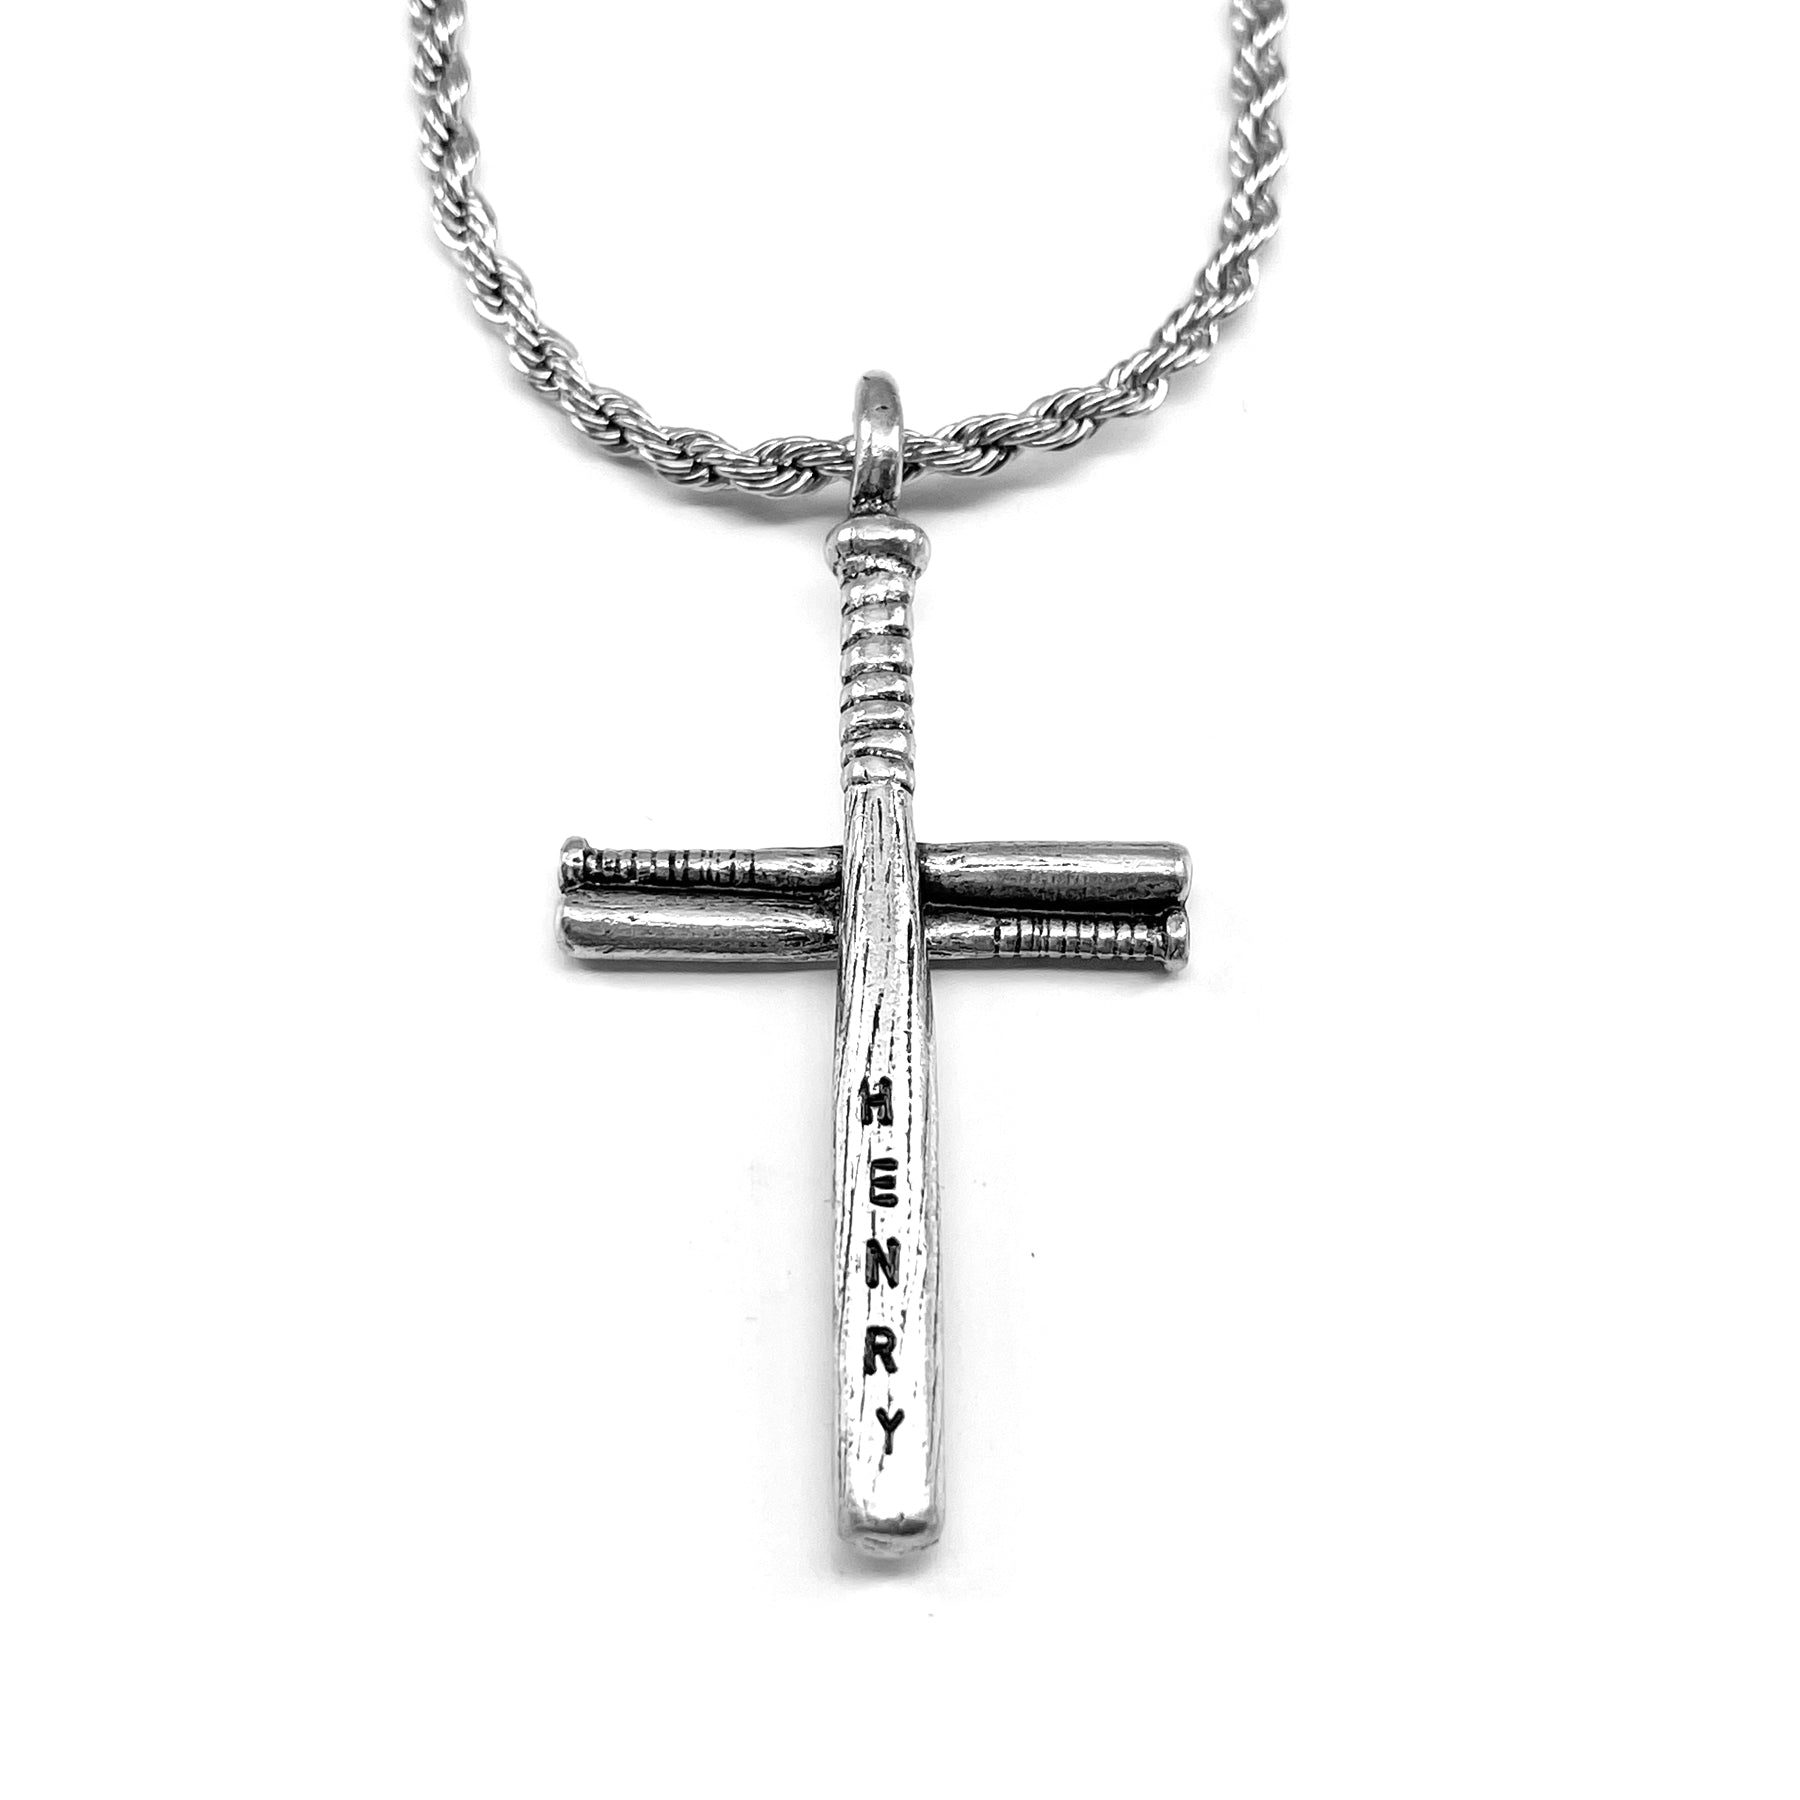 TwoAnts Baseball Cross Necklace for Boys 925 Sterling Silver Sports Pendant  Necklace with Inspirational Bible Verse Baseball Jewelry Gift for Men |  Amazon.com